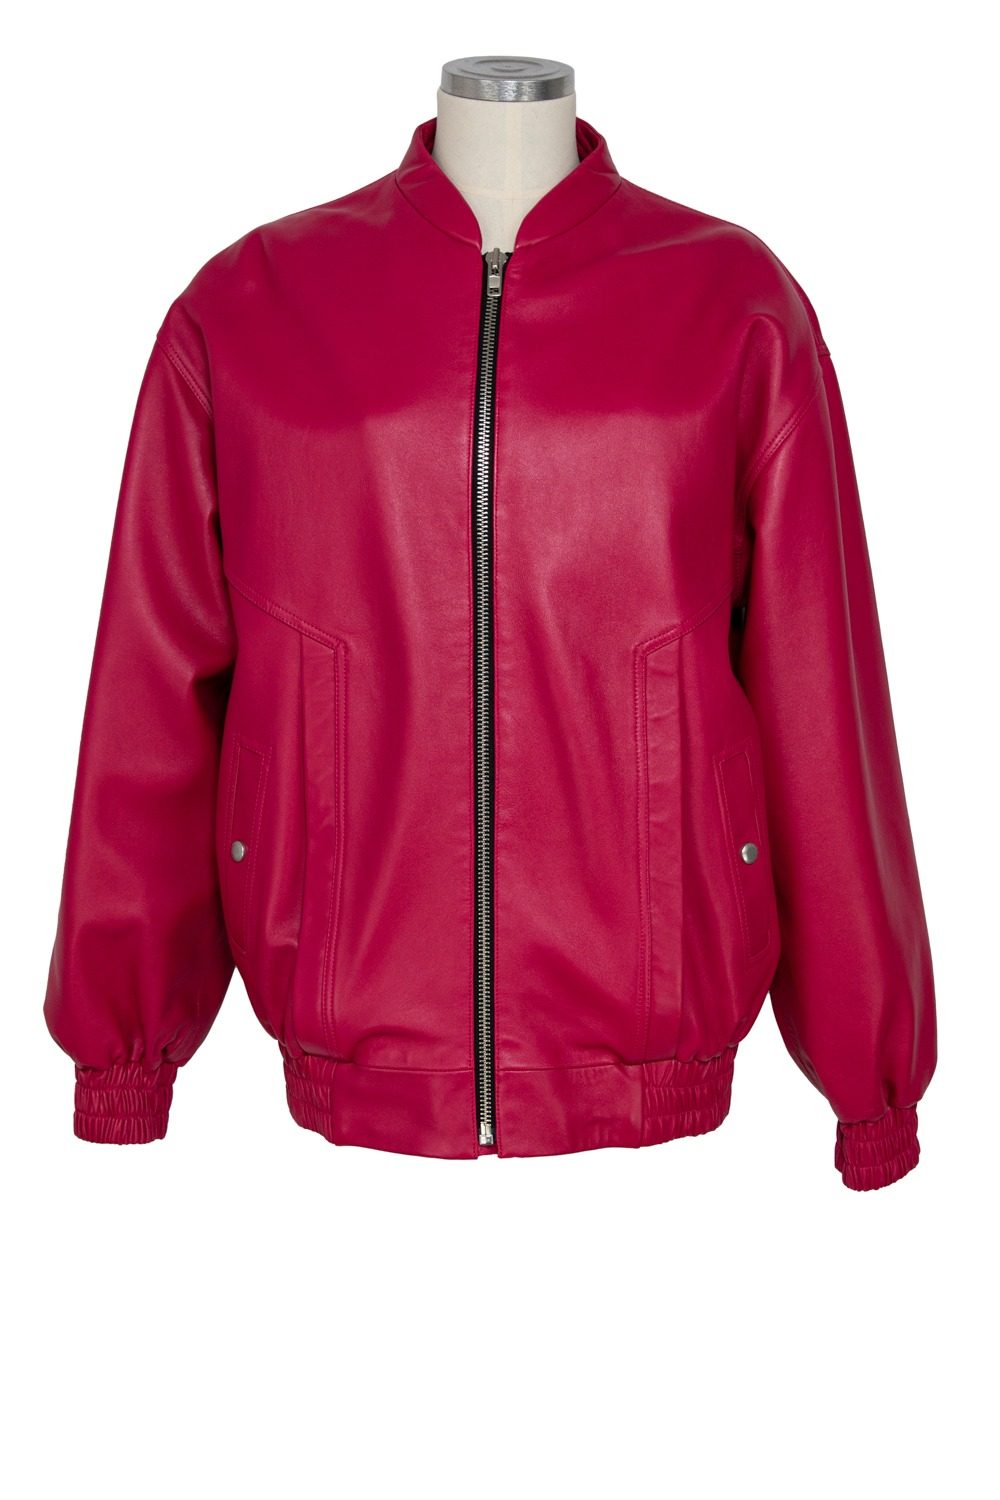 Thumbnail of http://Magda%20Butrym%20Bomber%20Jacke%20aus%20Schafsleder%20in%20Cyclam